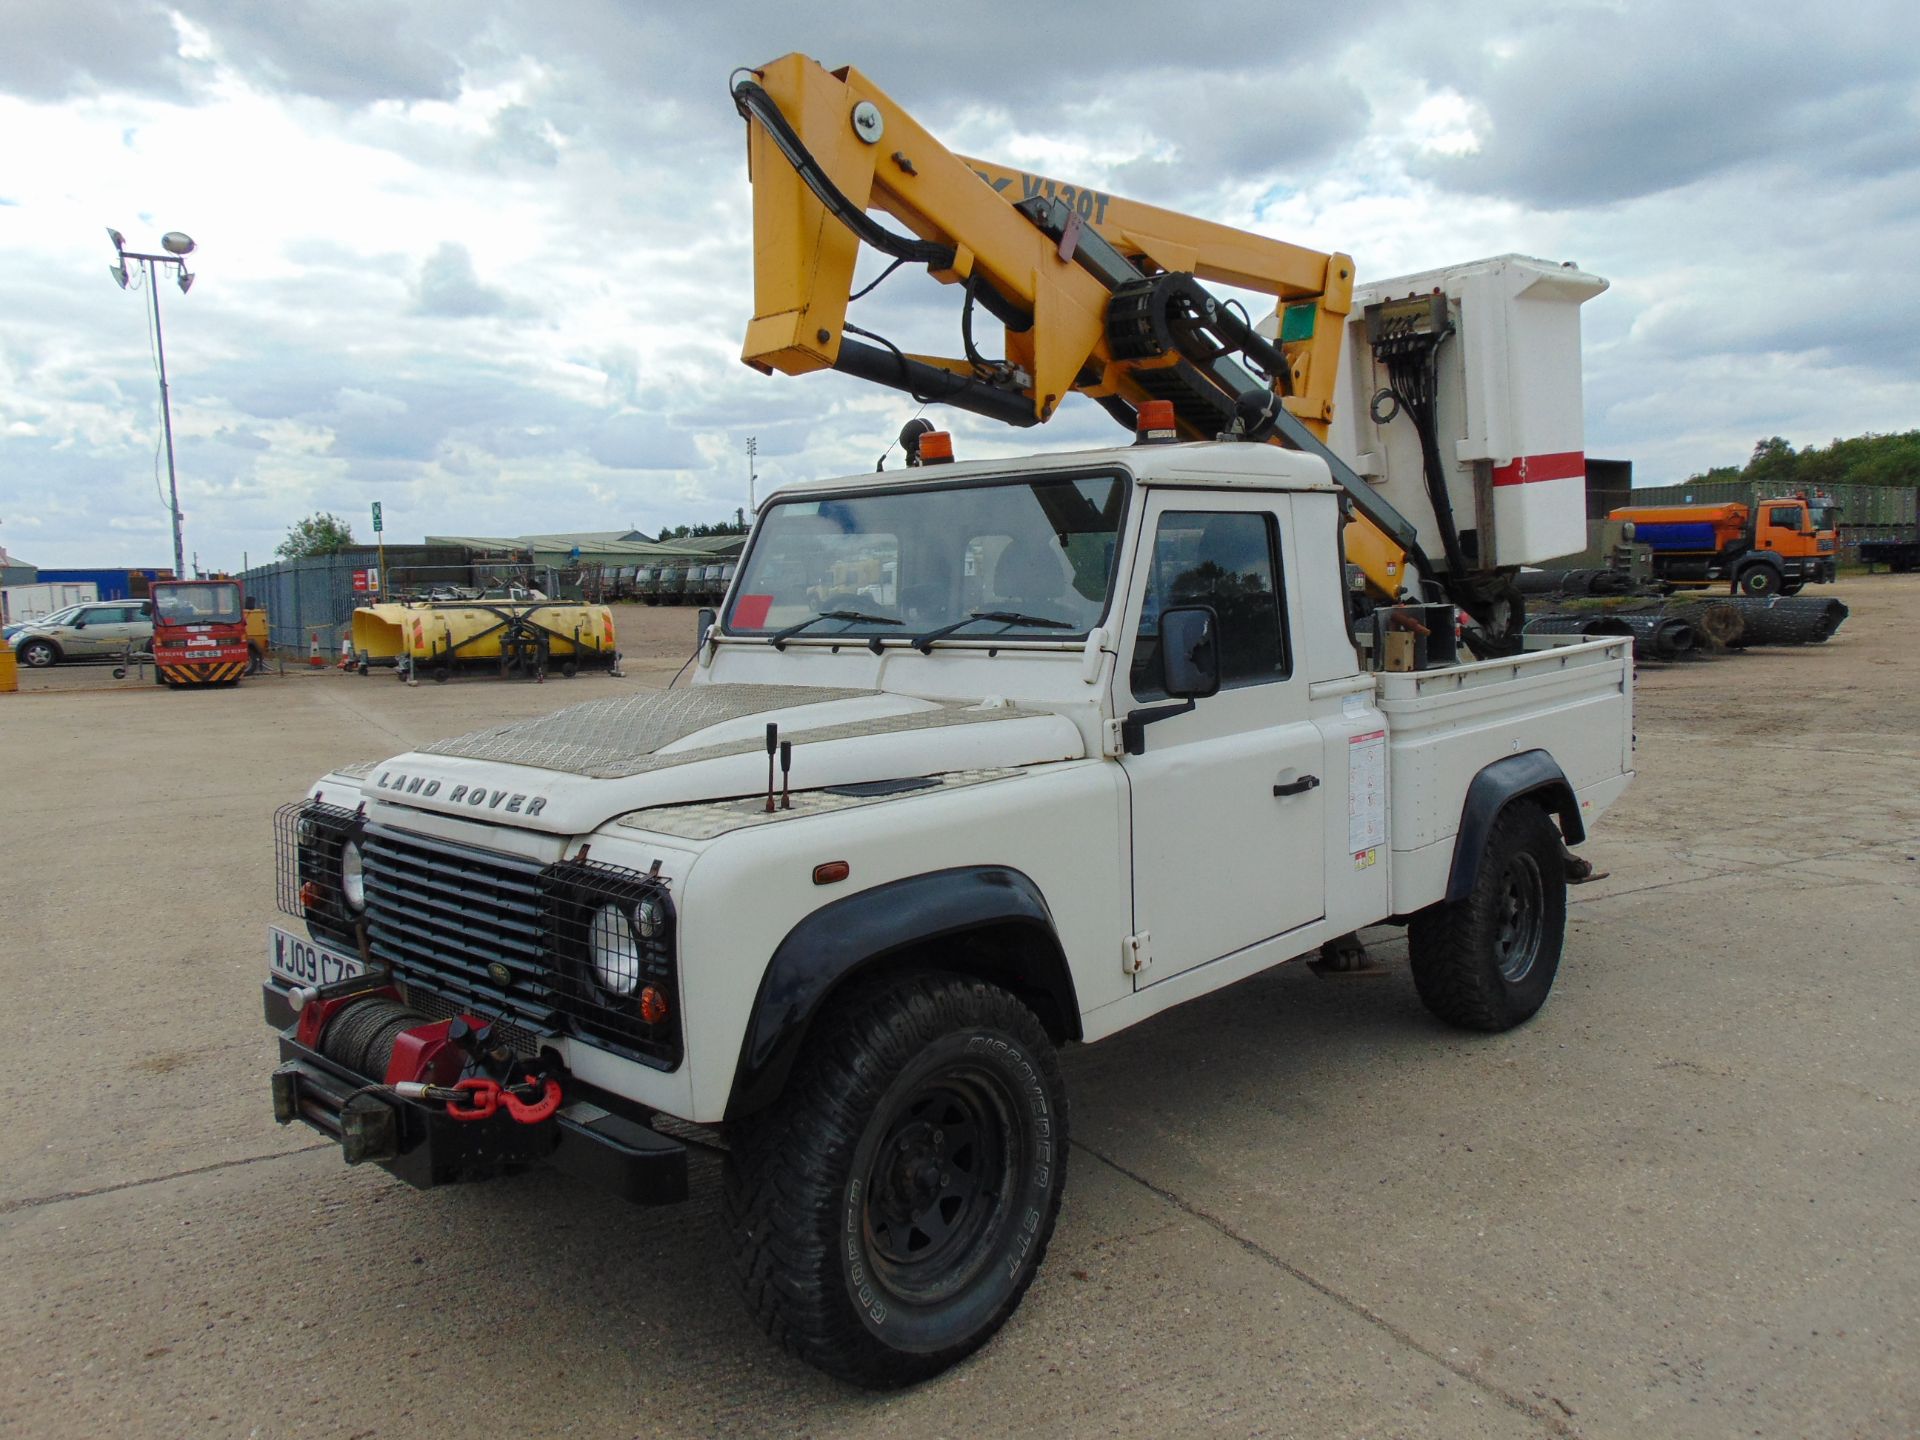 Land Rover Defender 110 High Capacity Cherry Picker - Image 3 of 23